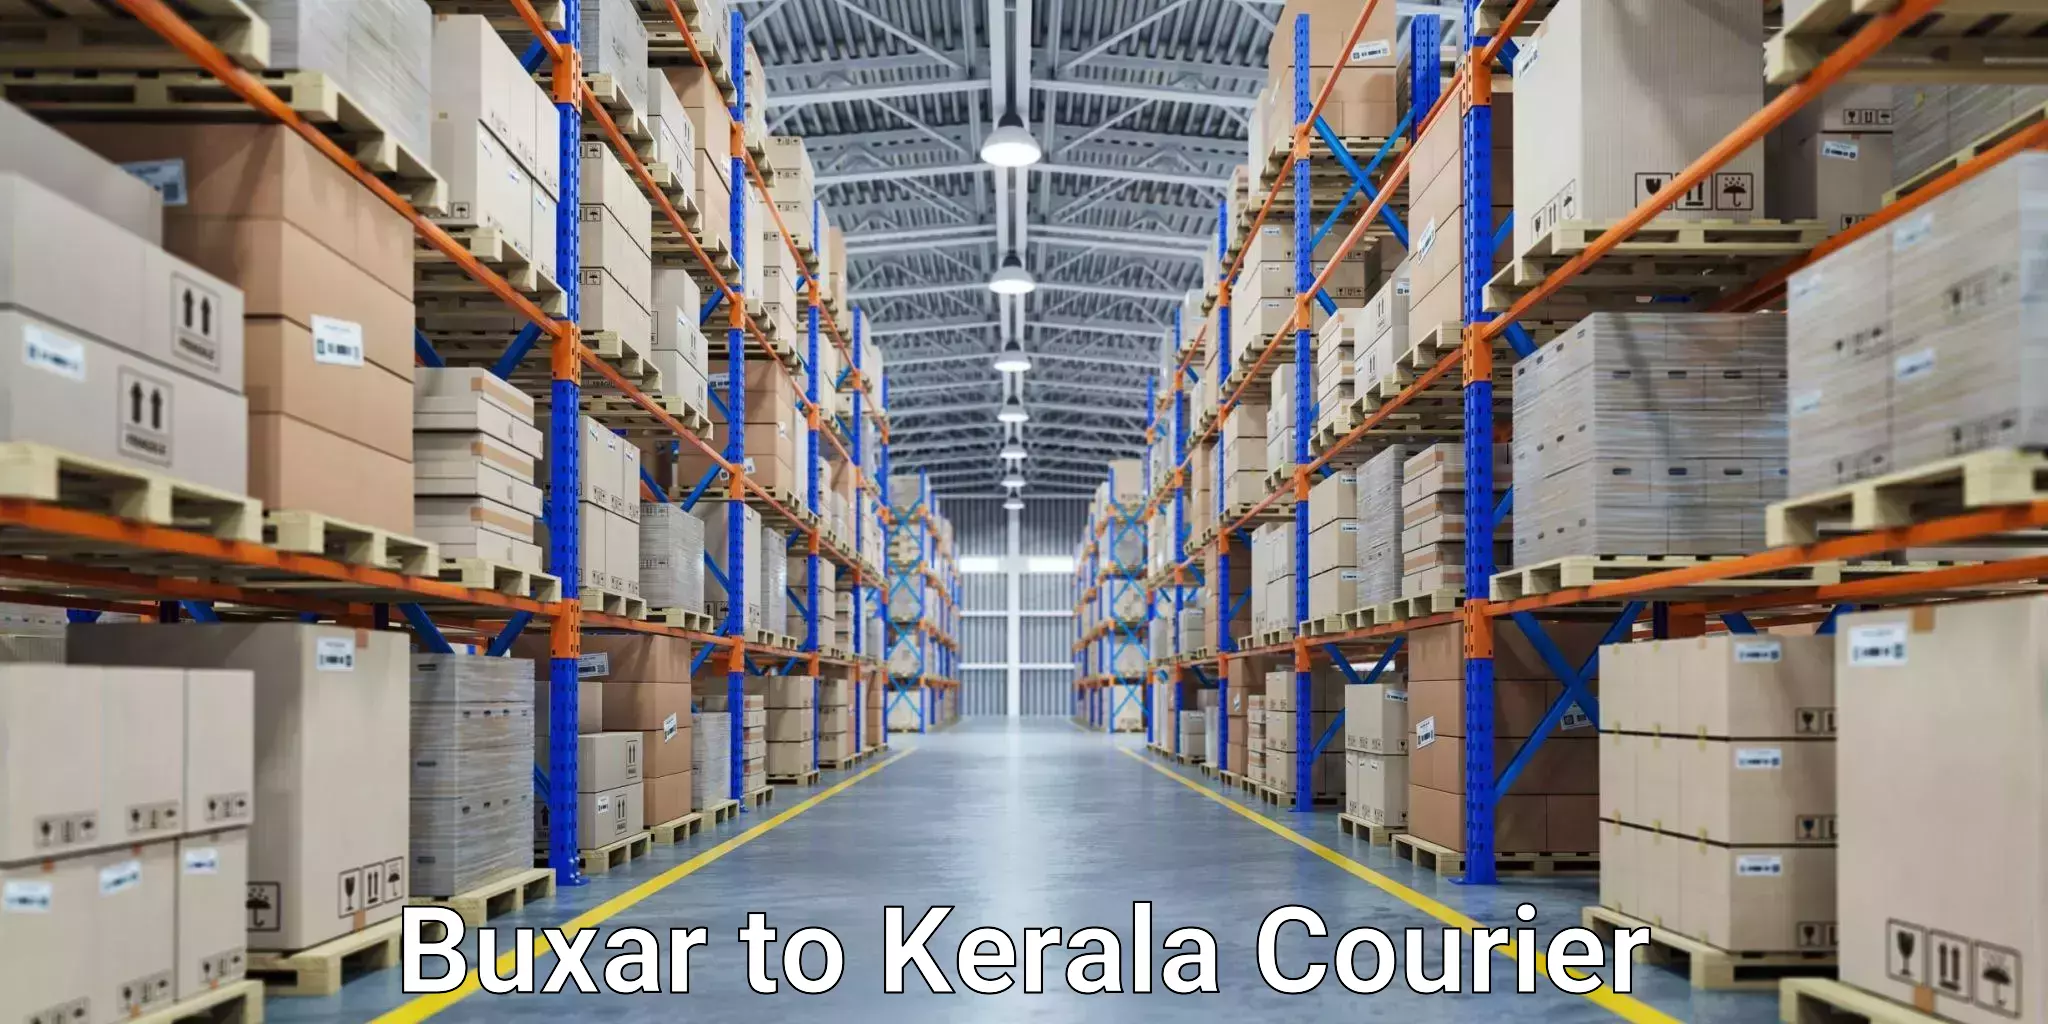 Next day courier in Buxar to Cochin Port Kochi